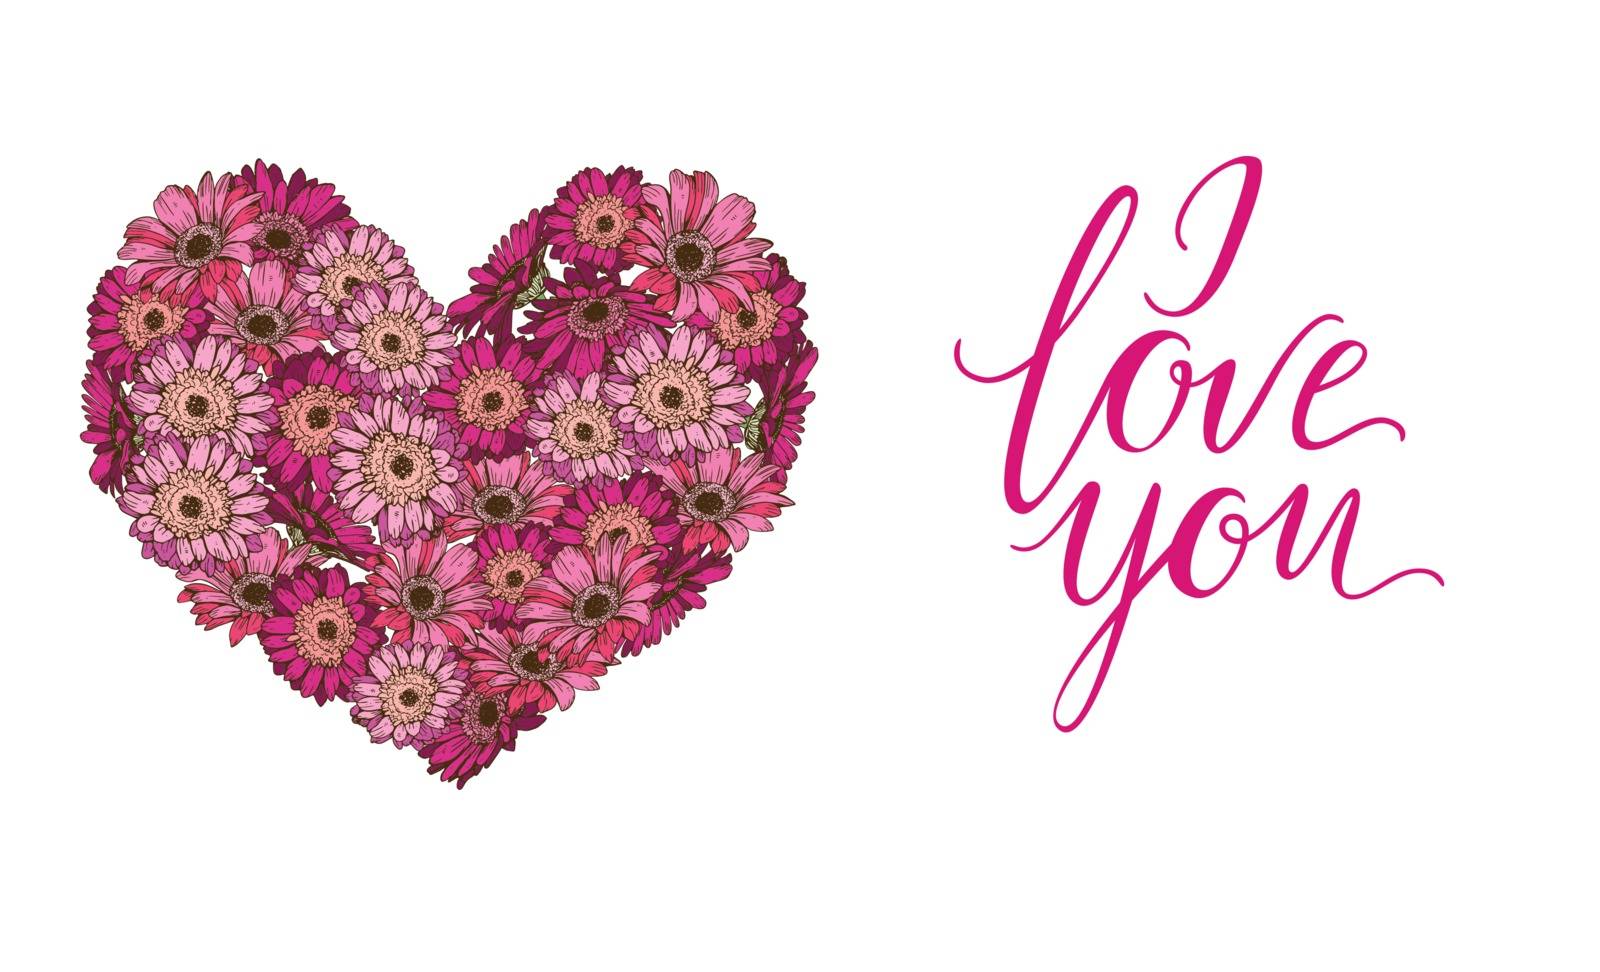 Heart of pink and violet daisies flowers and lettering I LOVE YOU. Vector illustration. by nutela_pancake